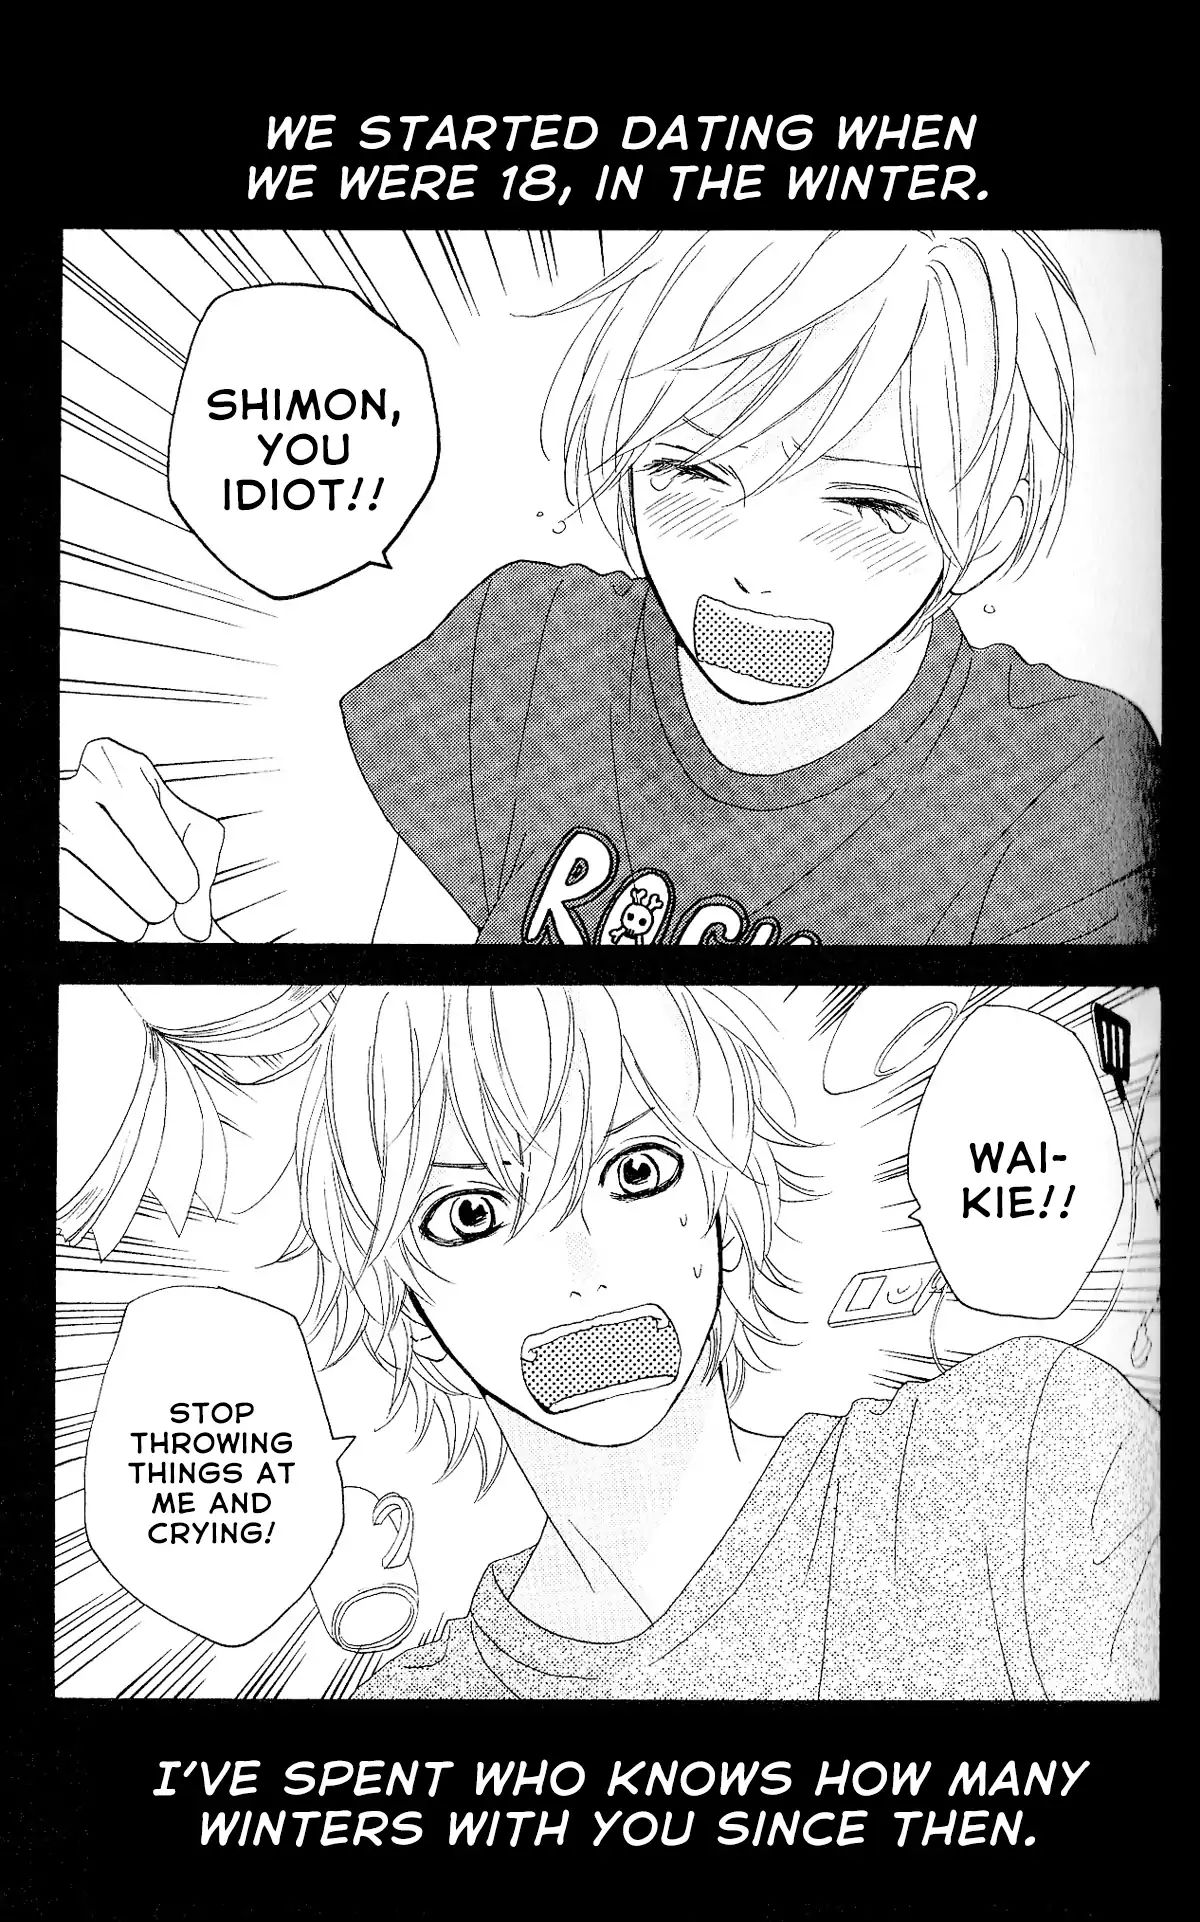 Sugars (Yamamori Mika) Vol.6 Chapter 28: To Each Their Own - Picture 1